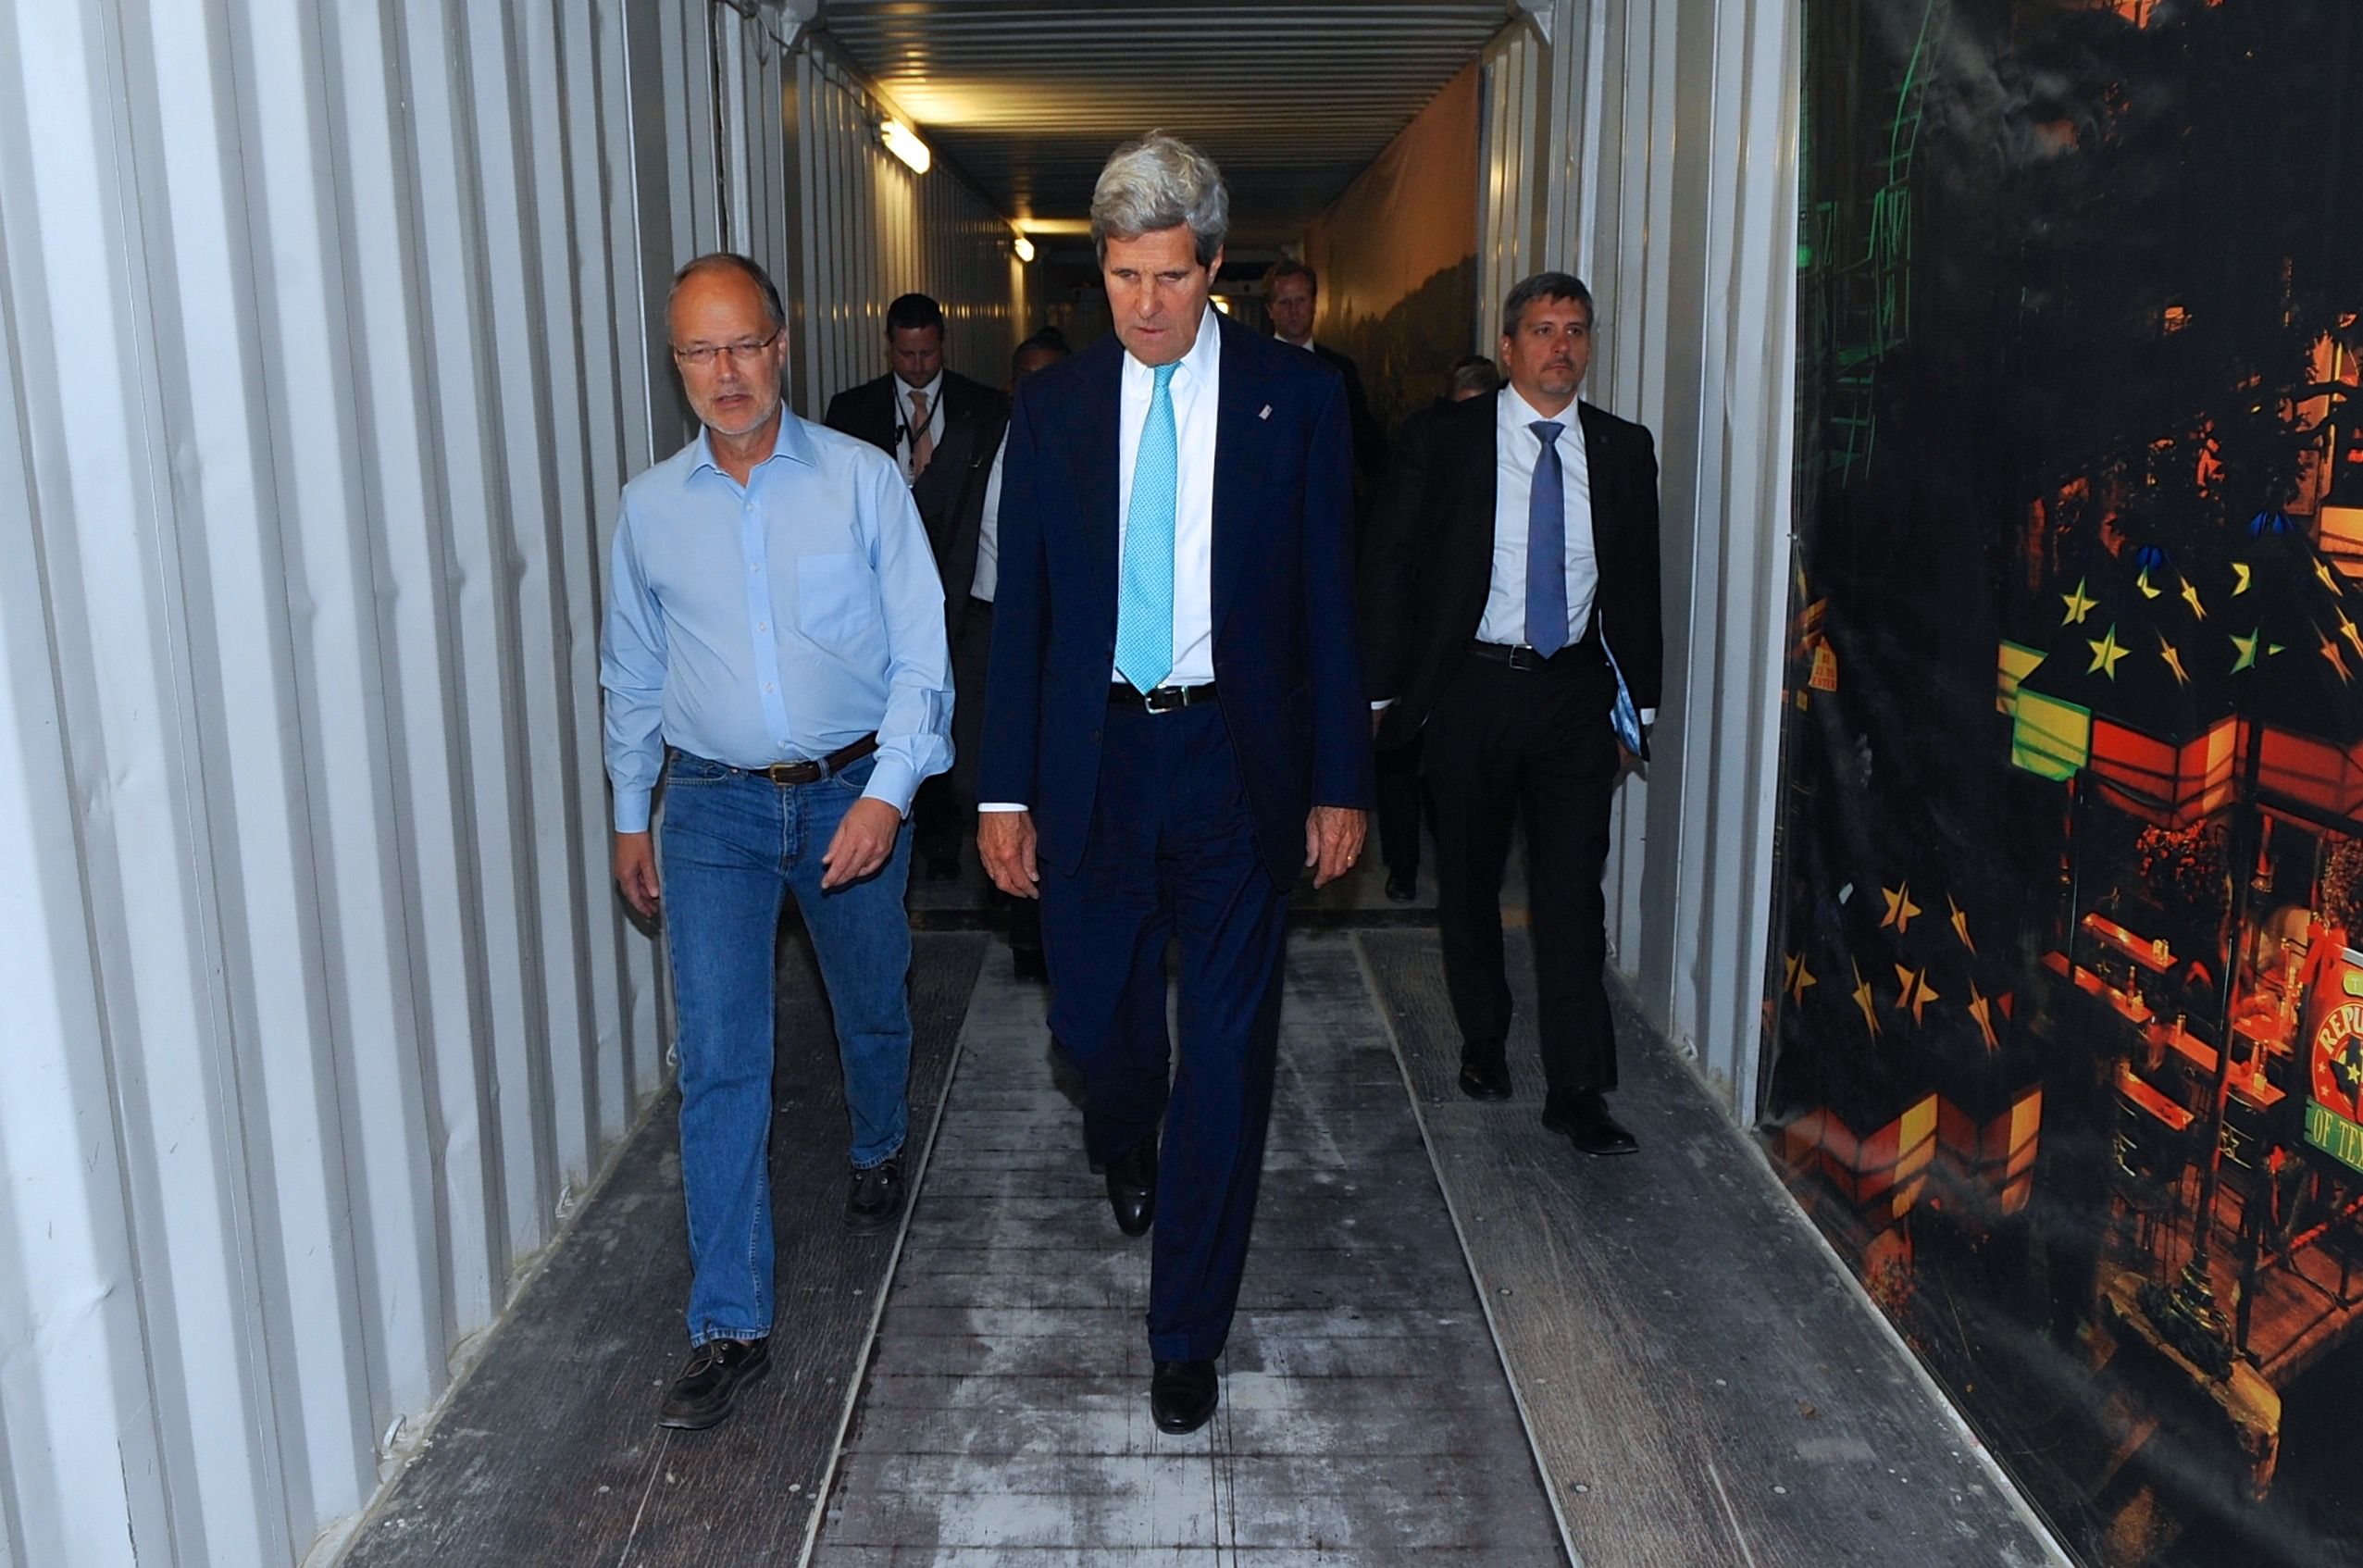 Then-Secretary of State John Kerry is seen walking with U.S. Ambassador to Afghanistan James Cunningham at the U.S. Embassy in Kabul.